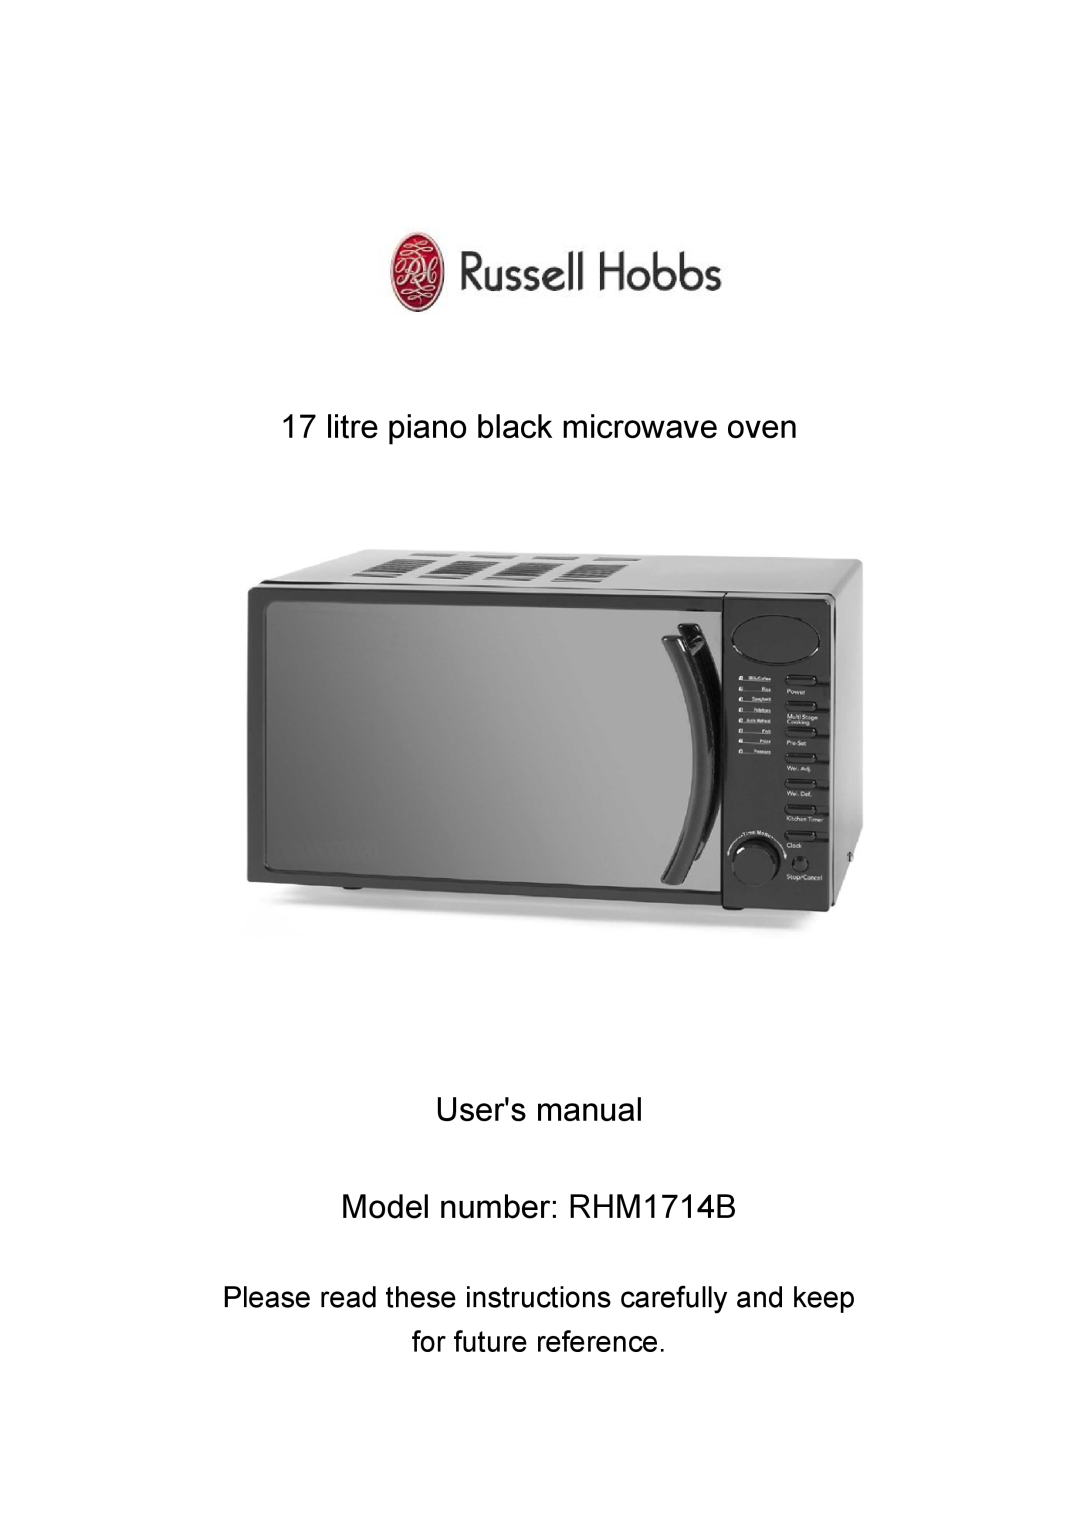 Russell Hobbs user manual Model number RHM1714B, Please read these instructions carefully and keep 